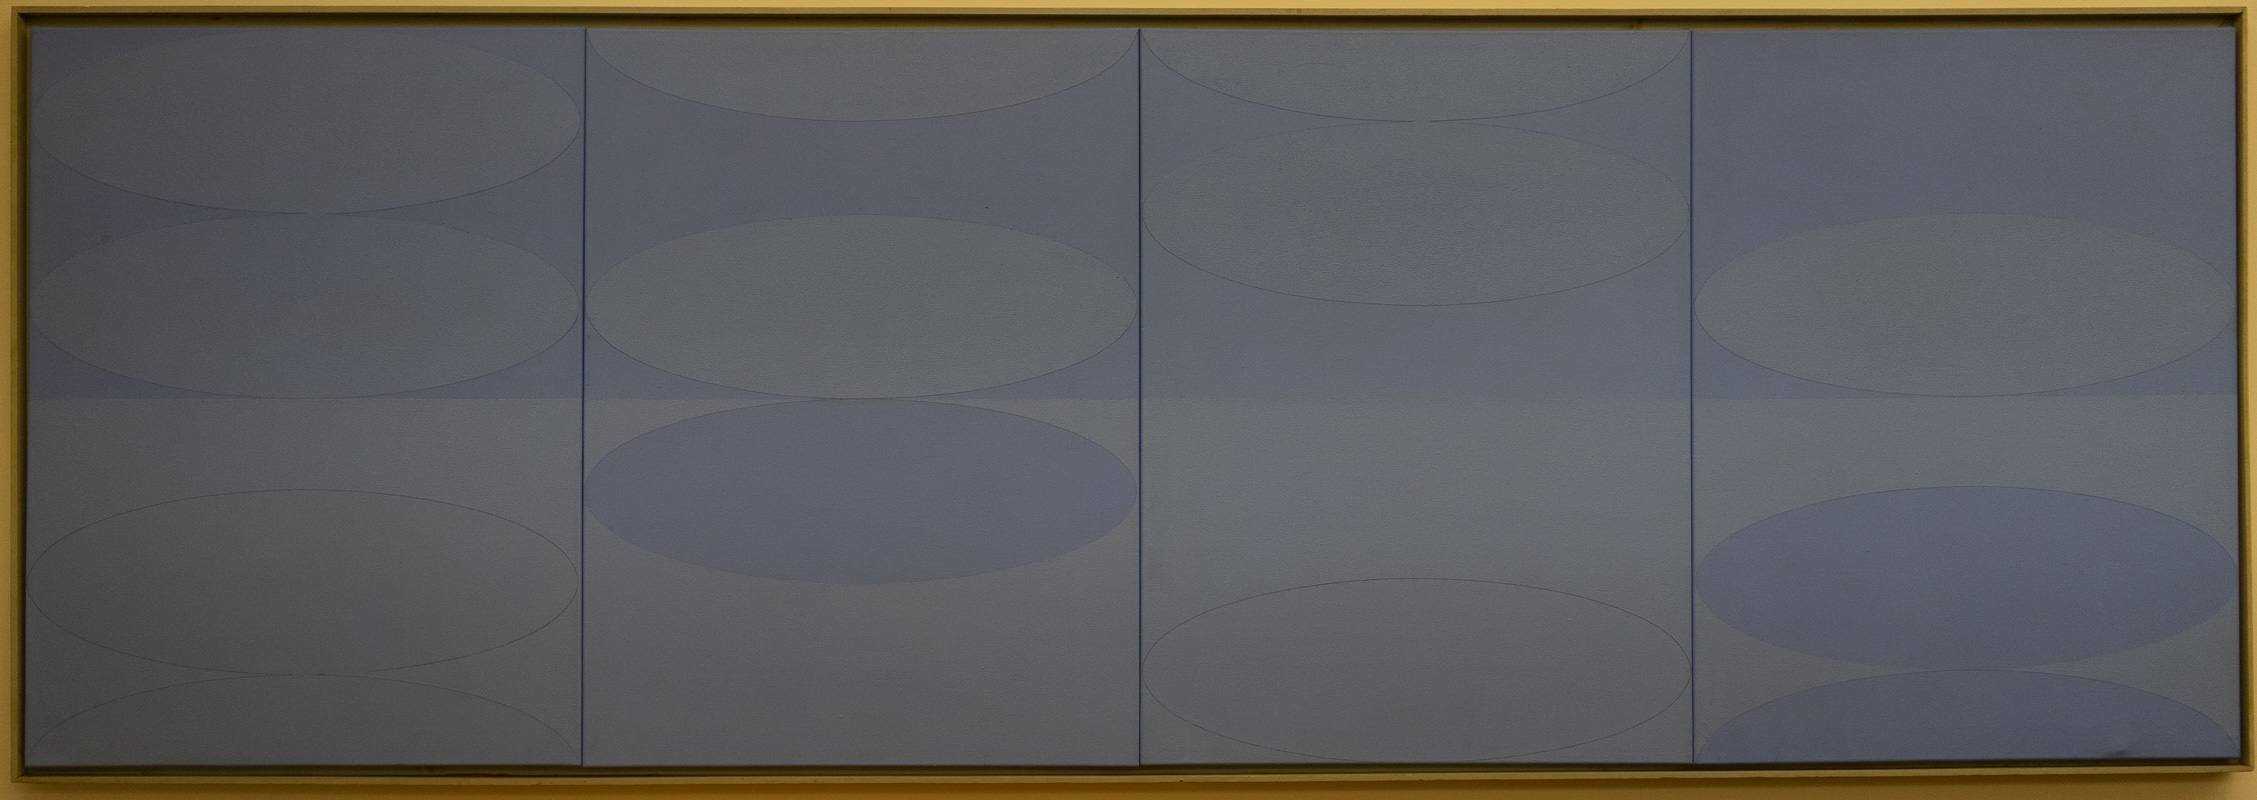 A bluehorizontal canvas, divided into two rows of four, with various ovals inset into most of the subdivisions.